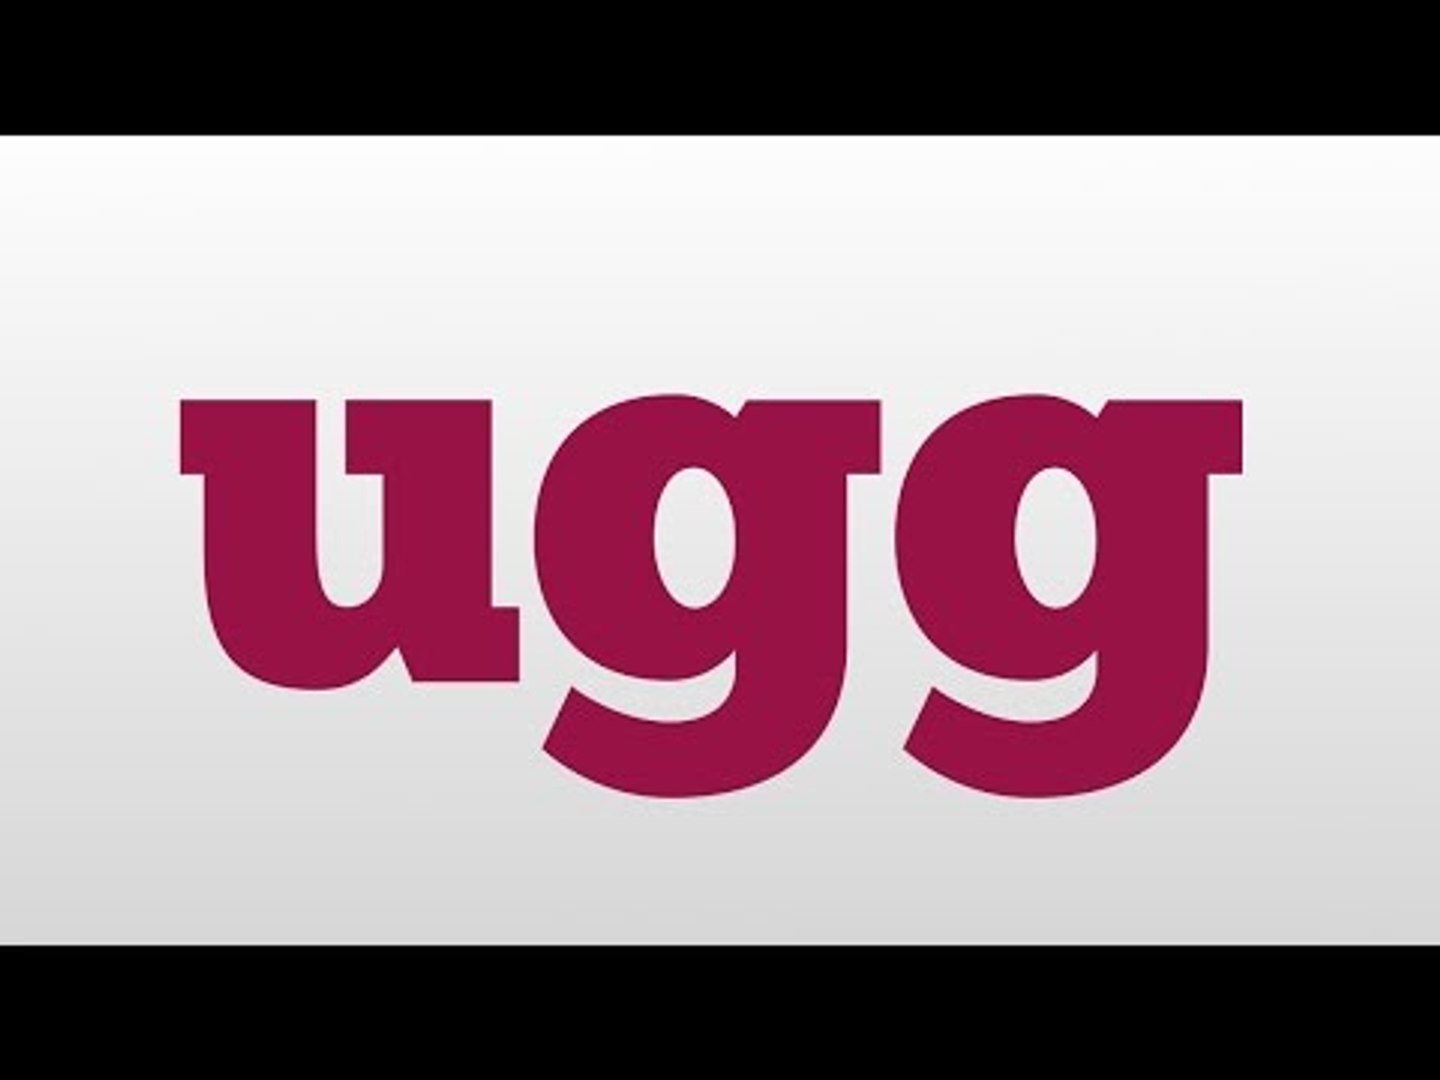 ugg meaning and pronunciation - video Dailymotion